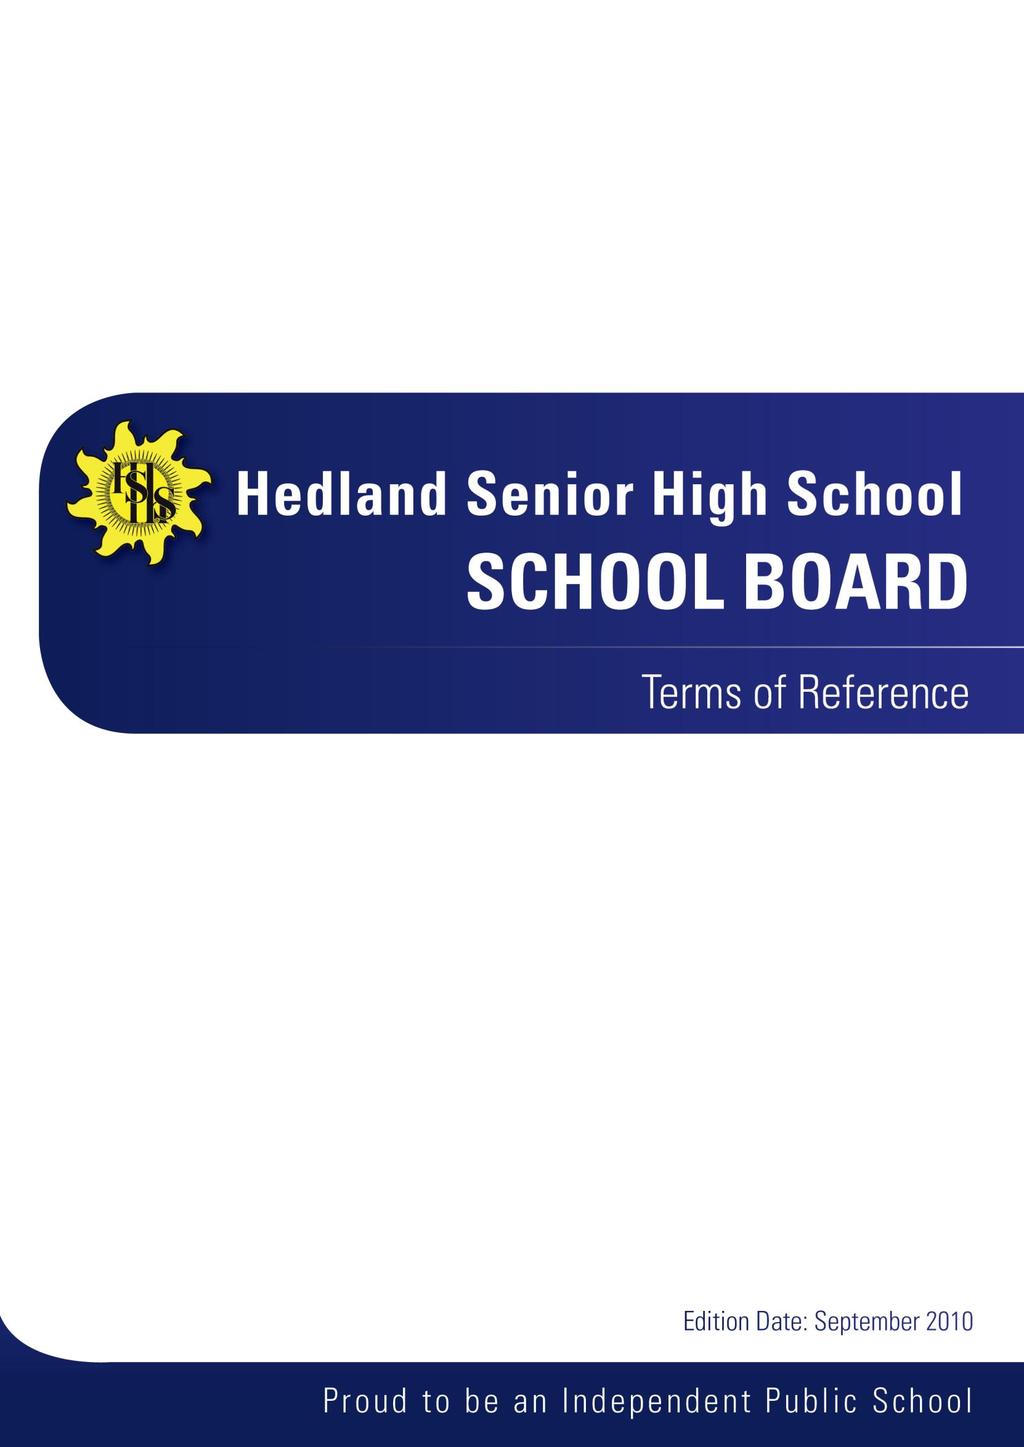 HEDLAND SENIOR HIGH SCHOOL BOARD TERMS OF REFERENCE -